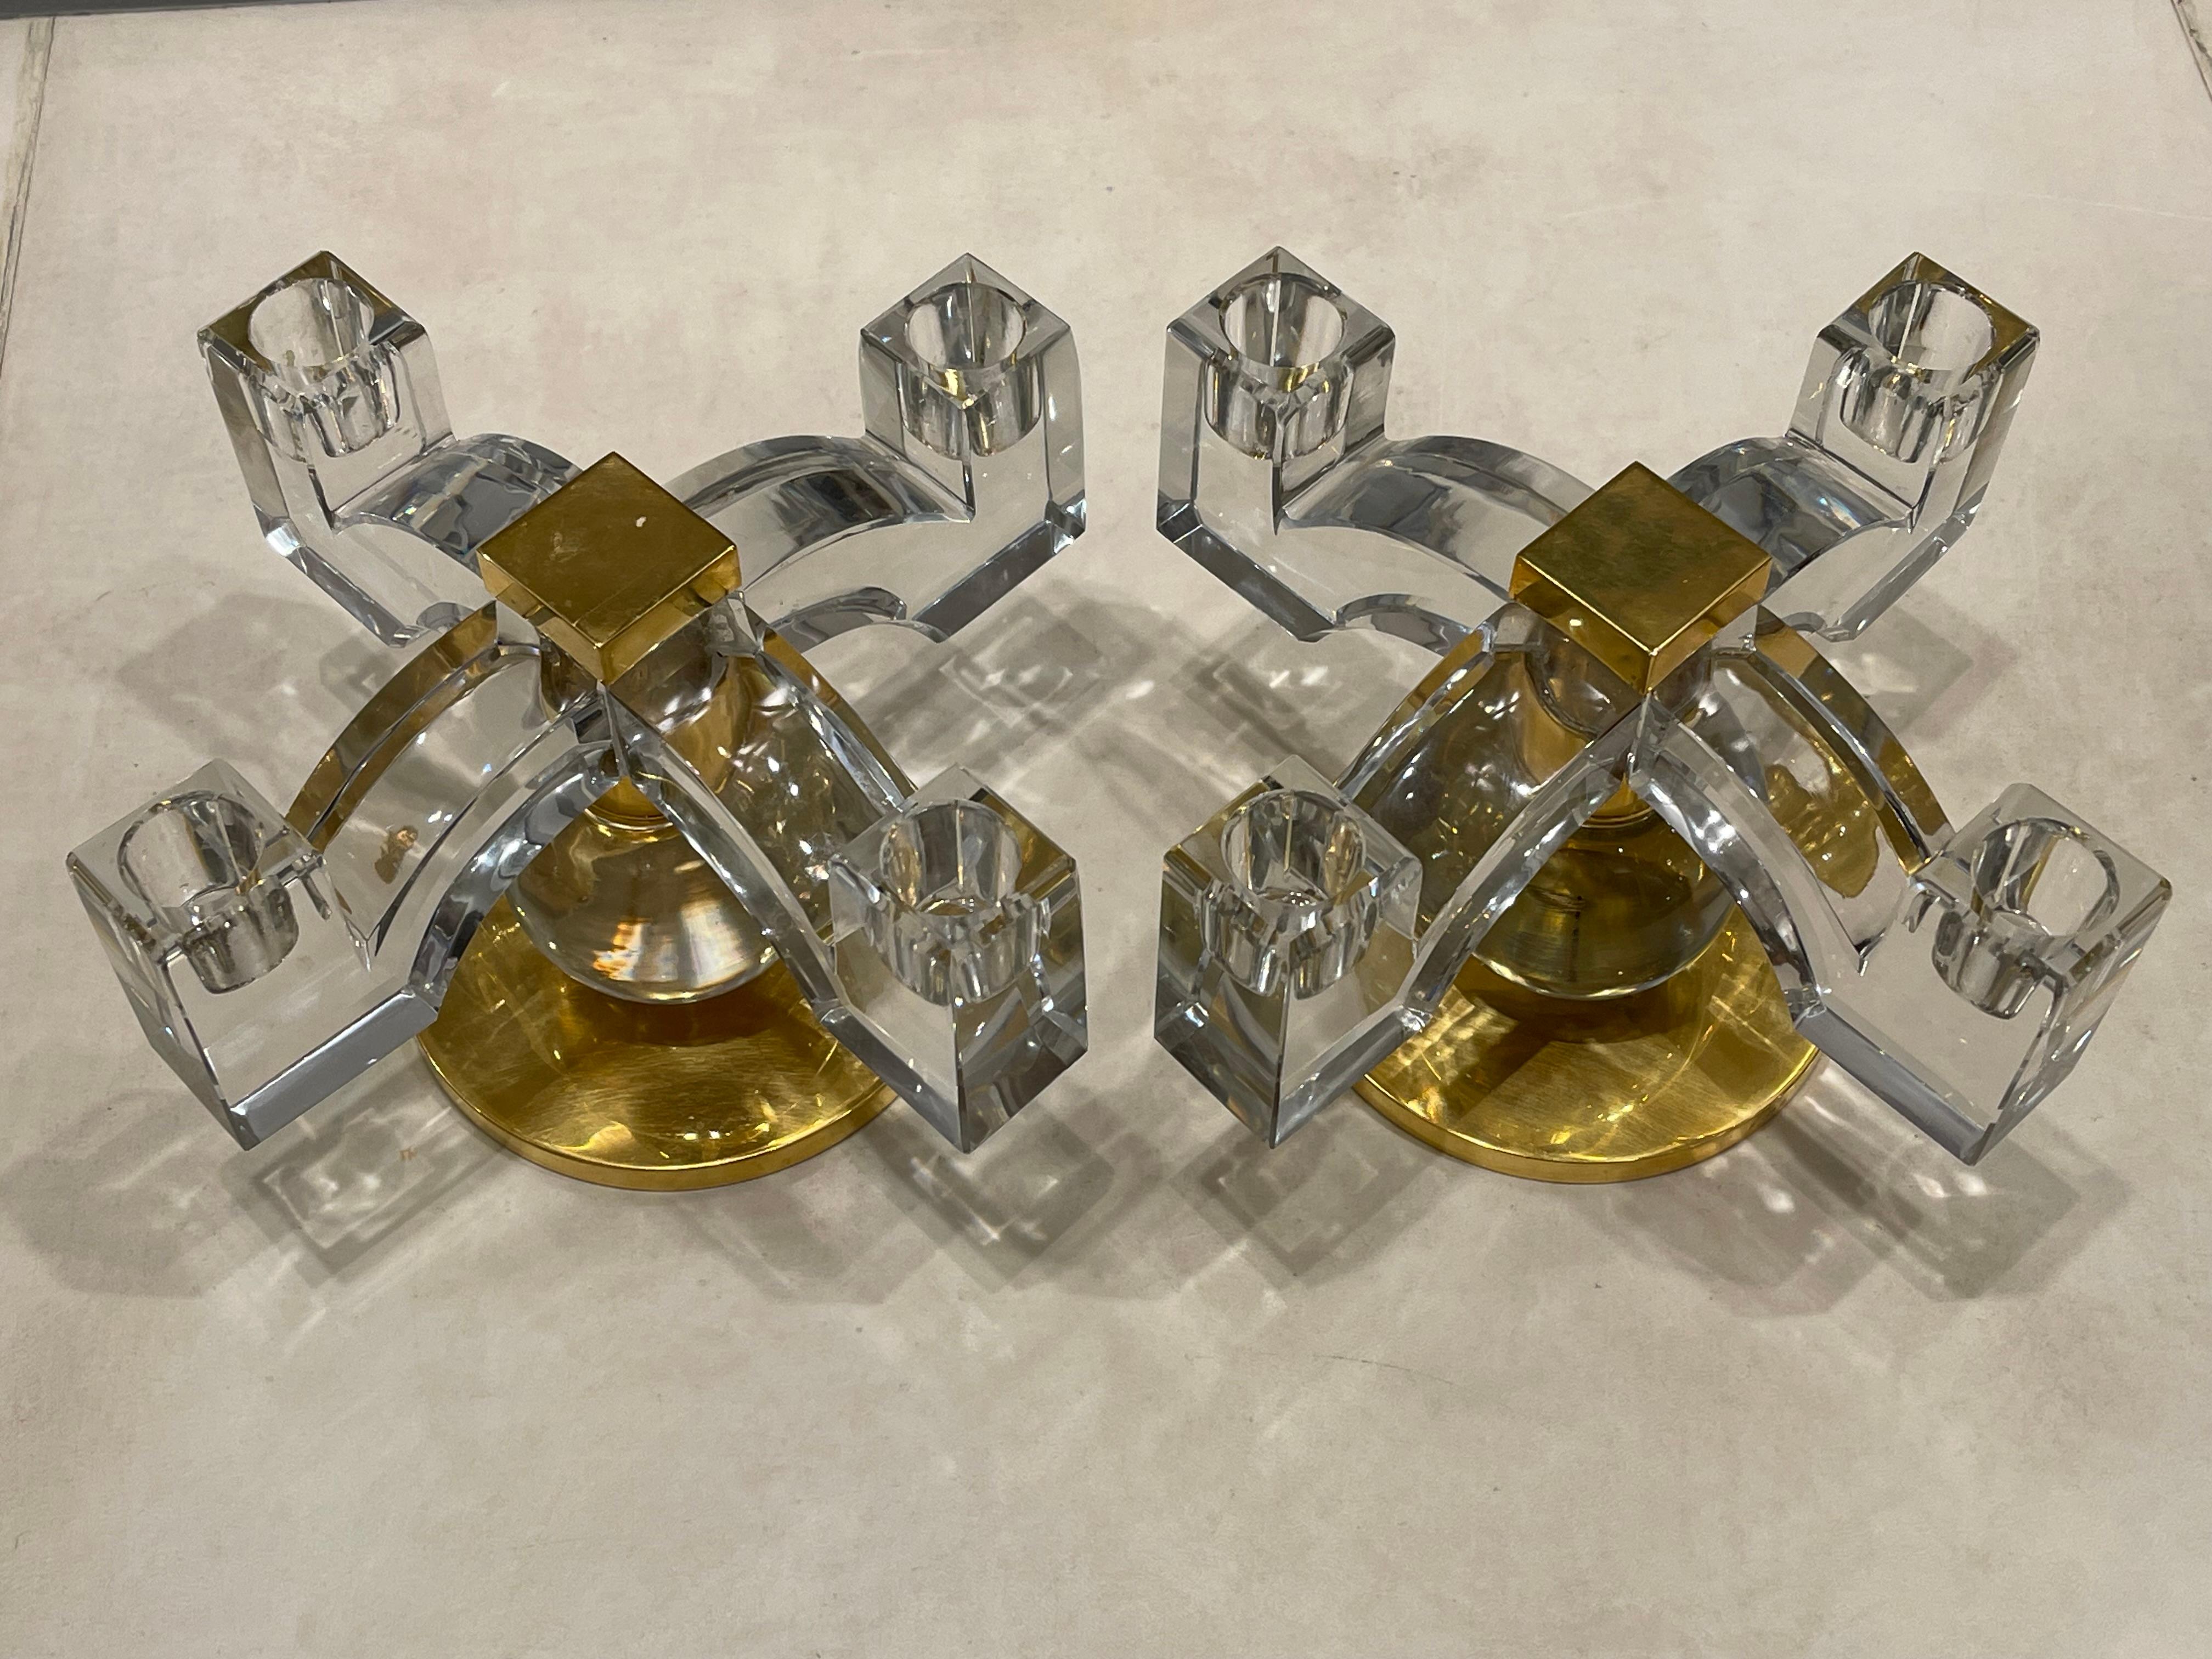 French Fabulous pair of Baccarat crystal candelabras, by Jacques Adnet, France, 1935 For Sale